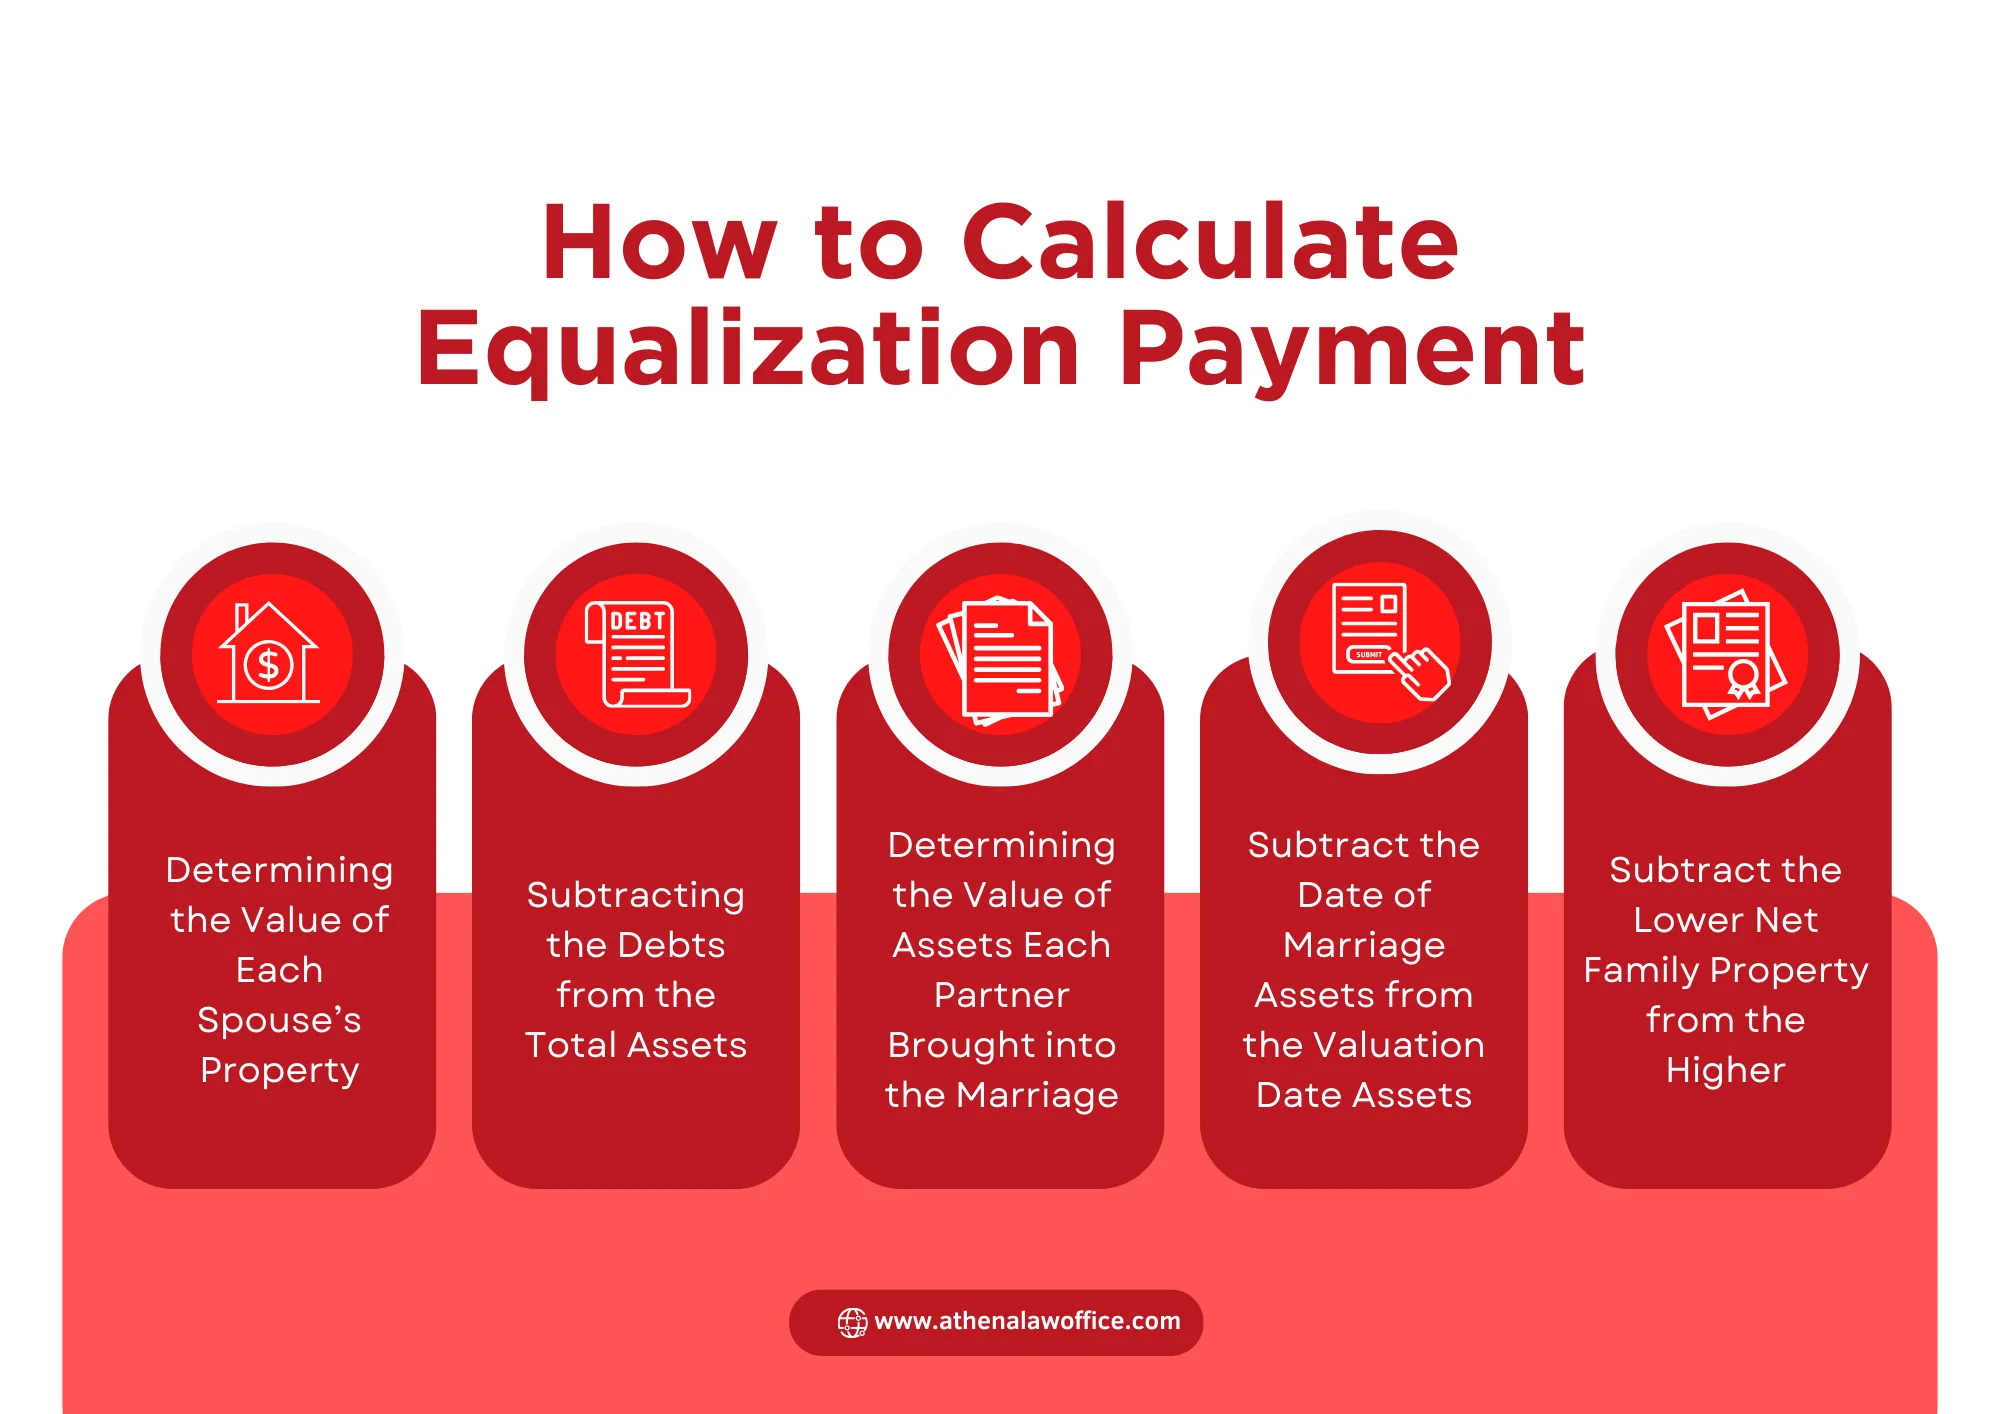 An infographic on how to calculate equalization payments in Ontario